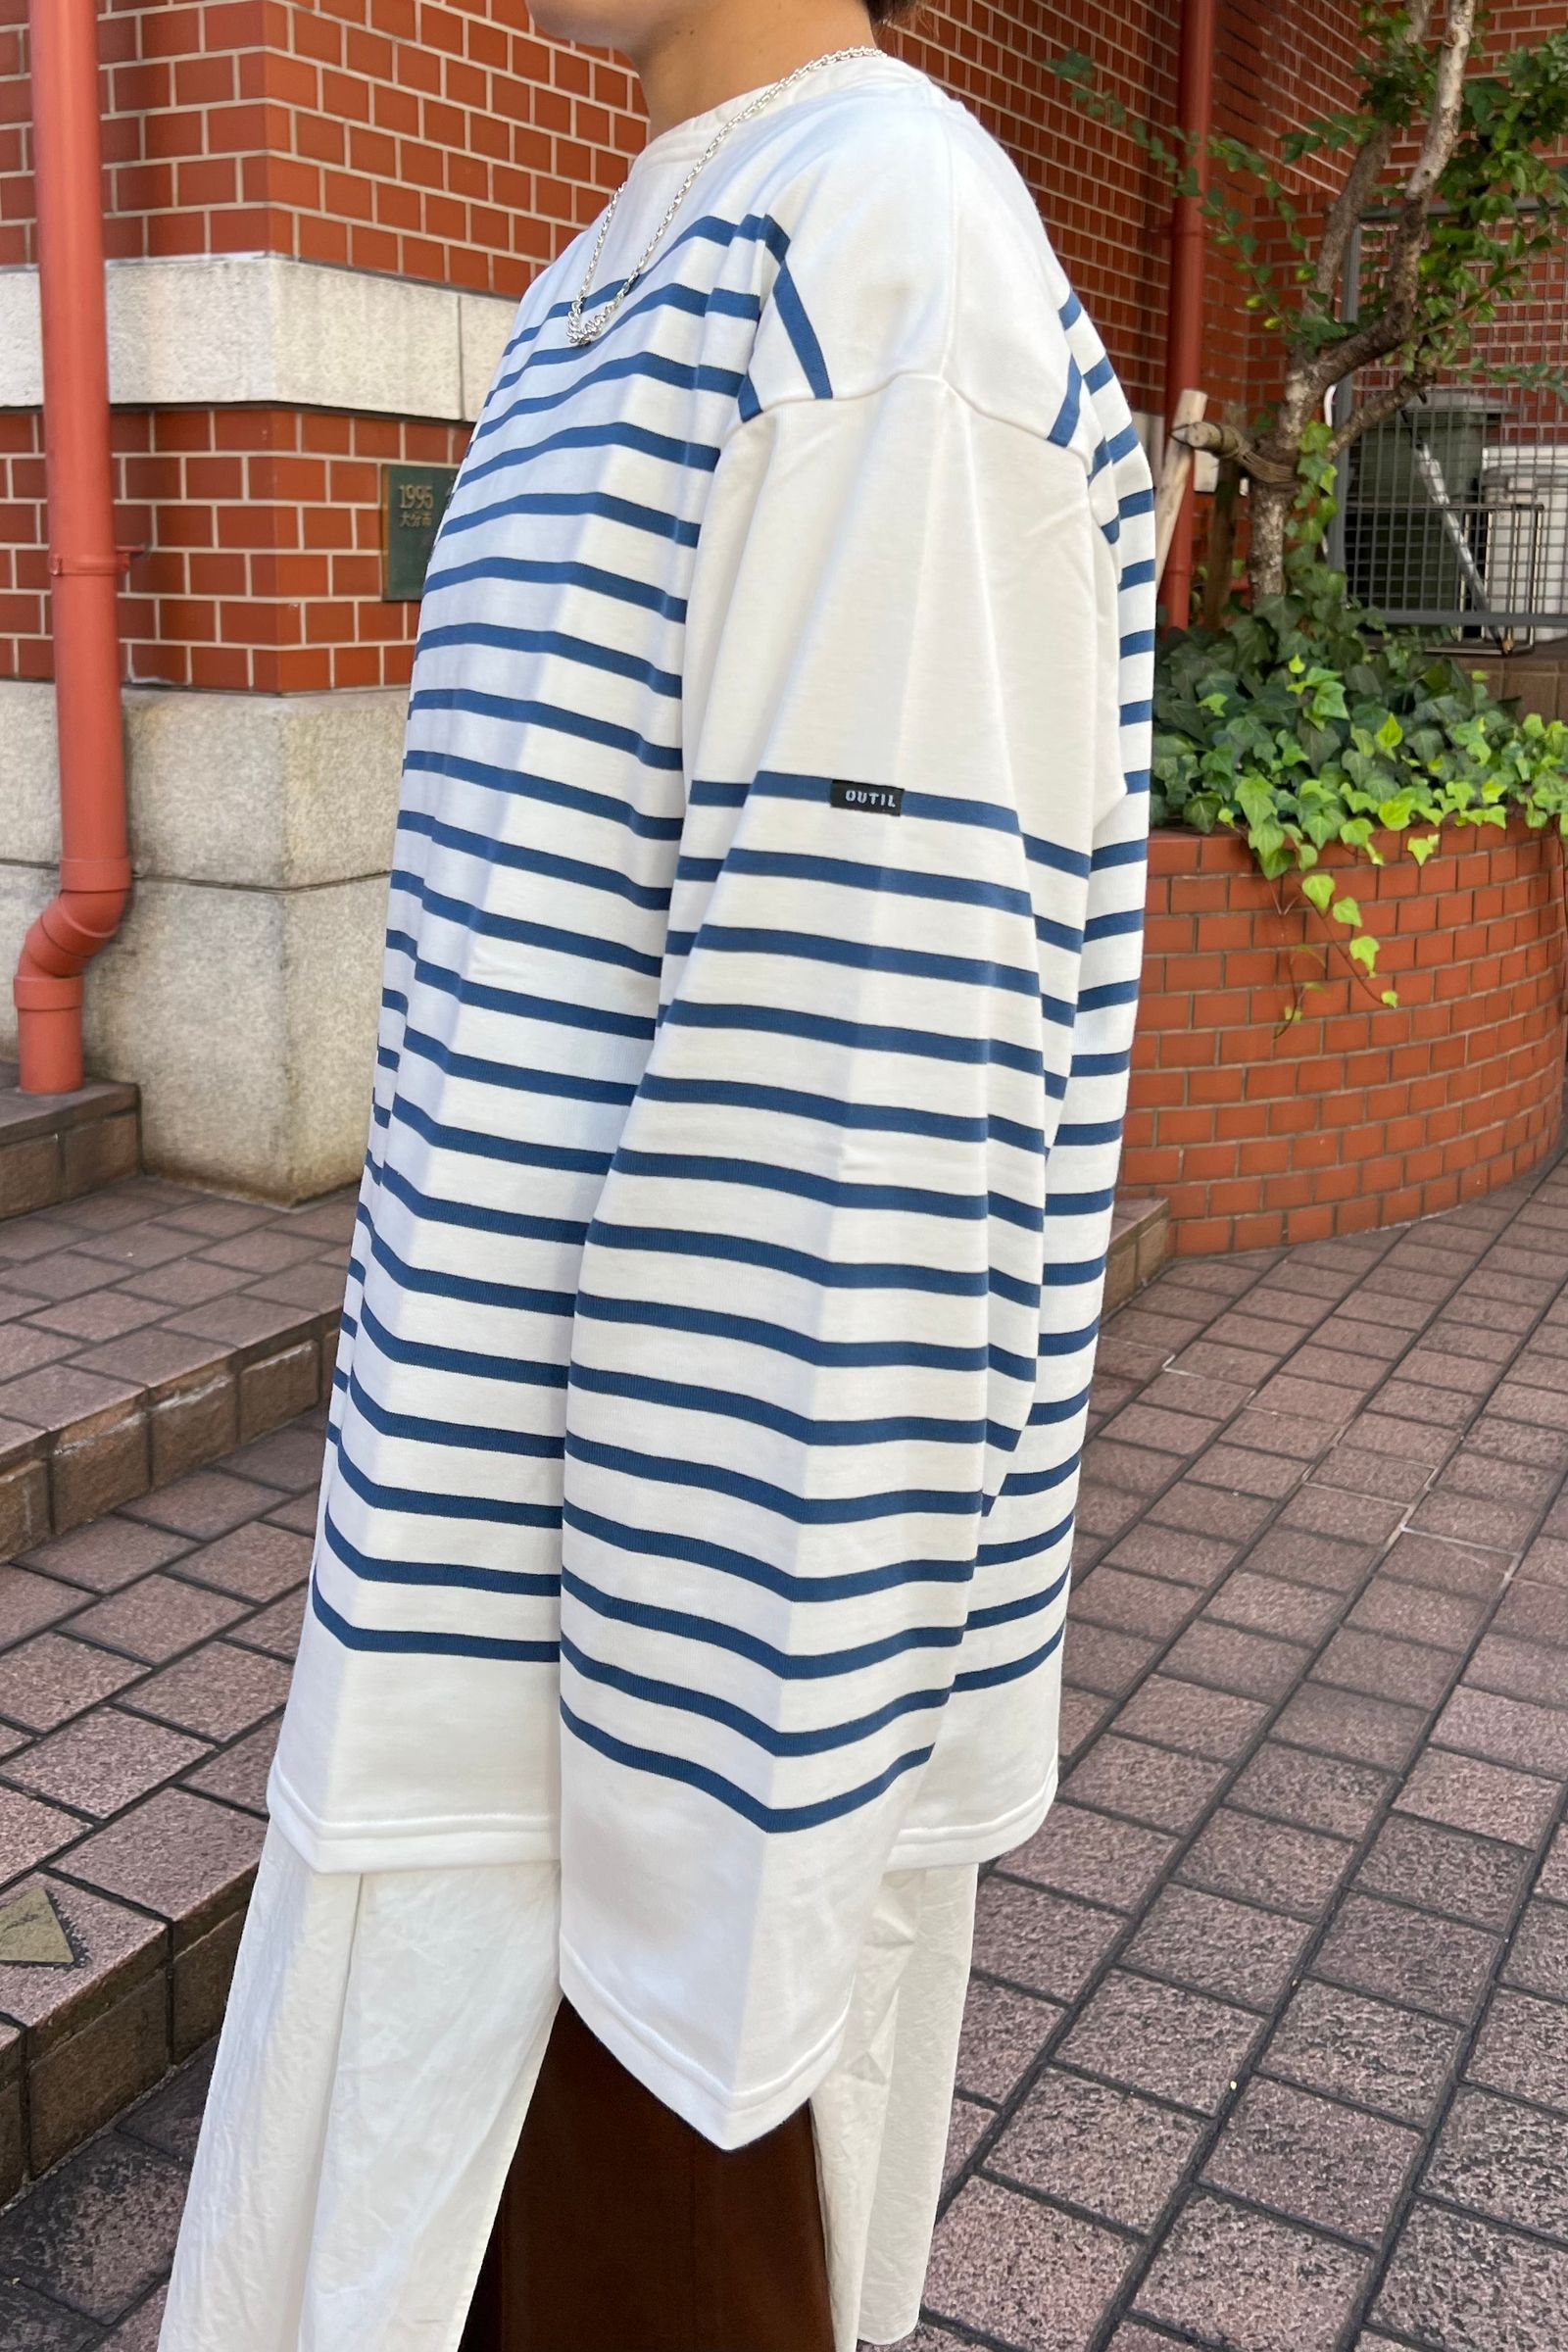 OUTIL - tricot aast -off×navy- 21aw unisex | asterisk